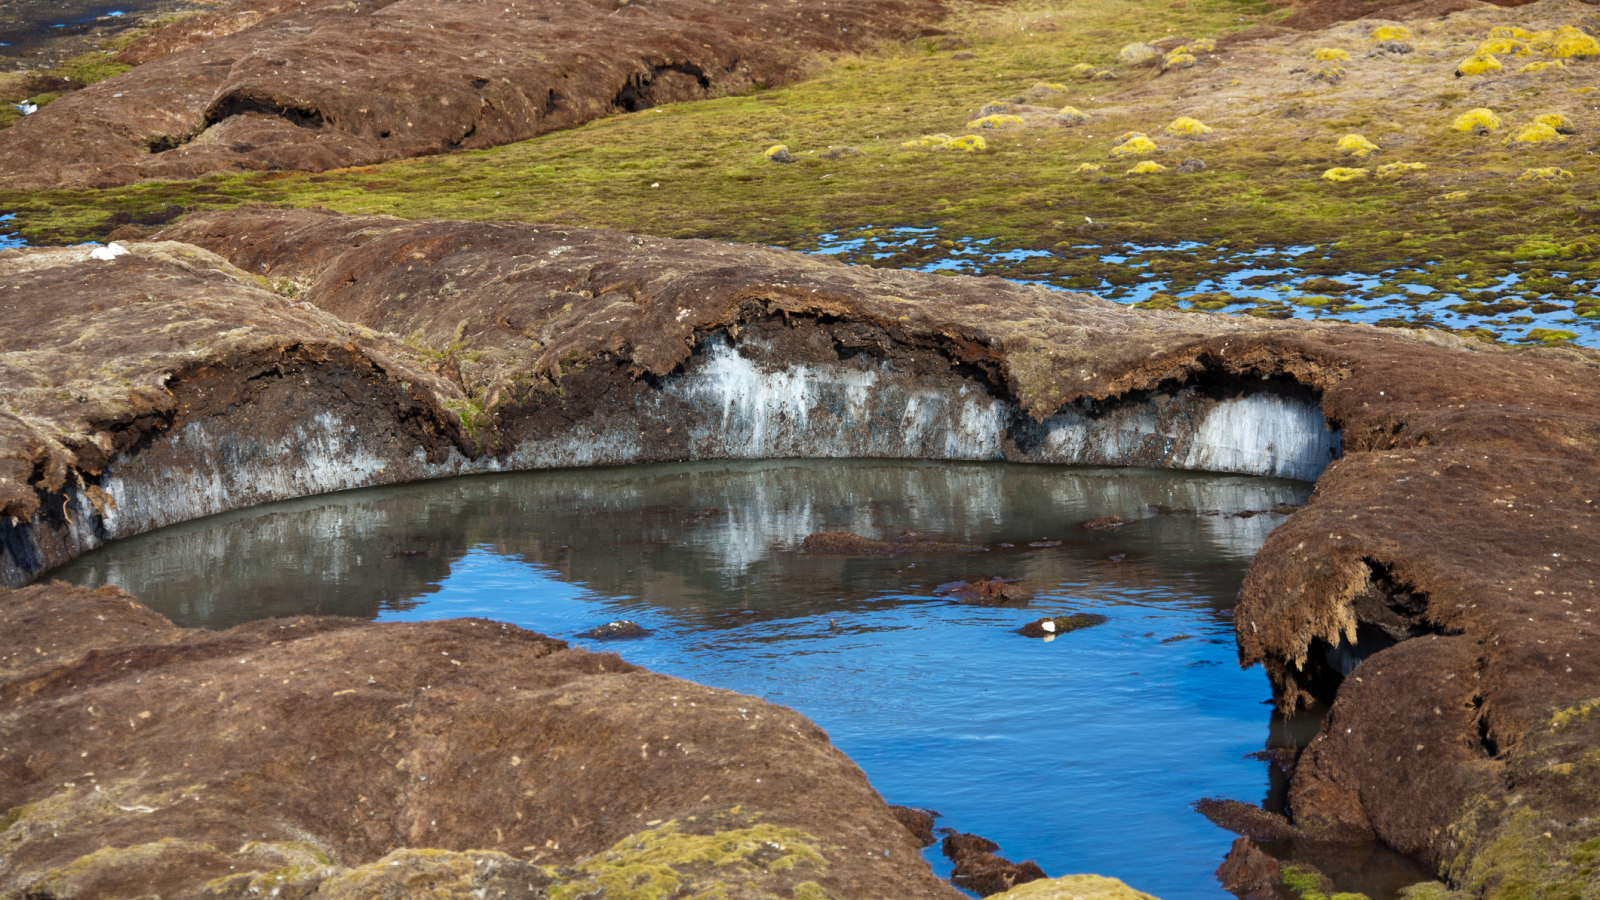 Ice under permafrost soil in Spitzbergen with o pool of water.